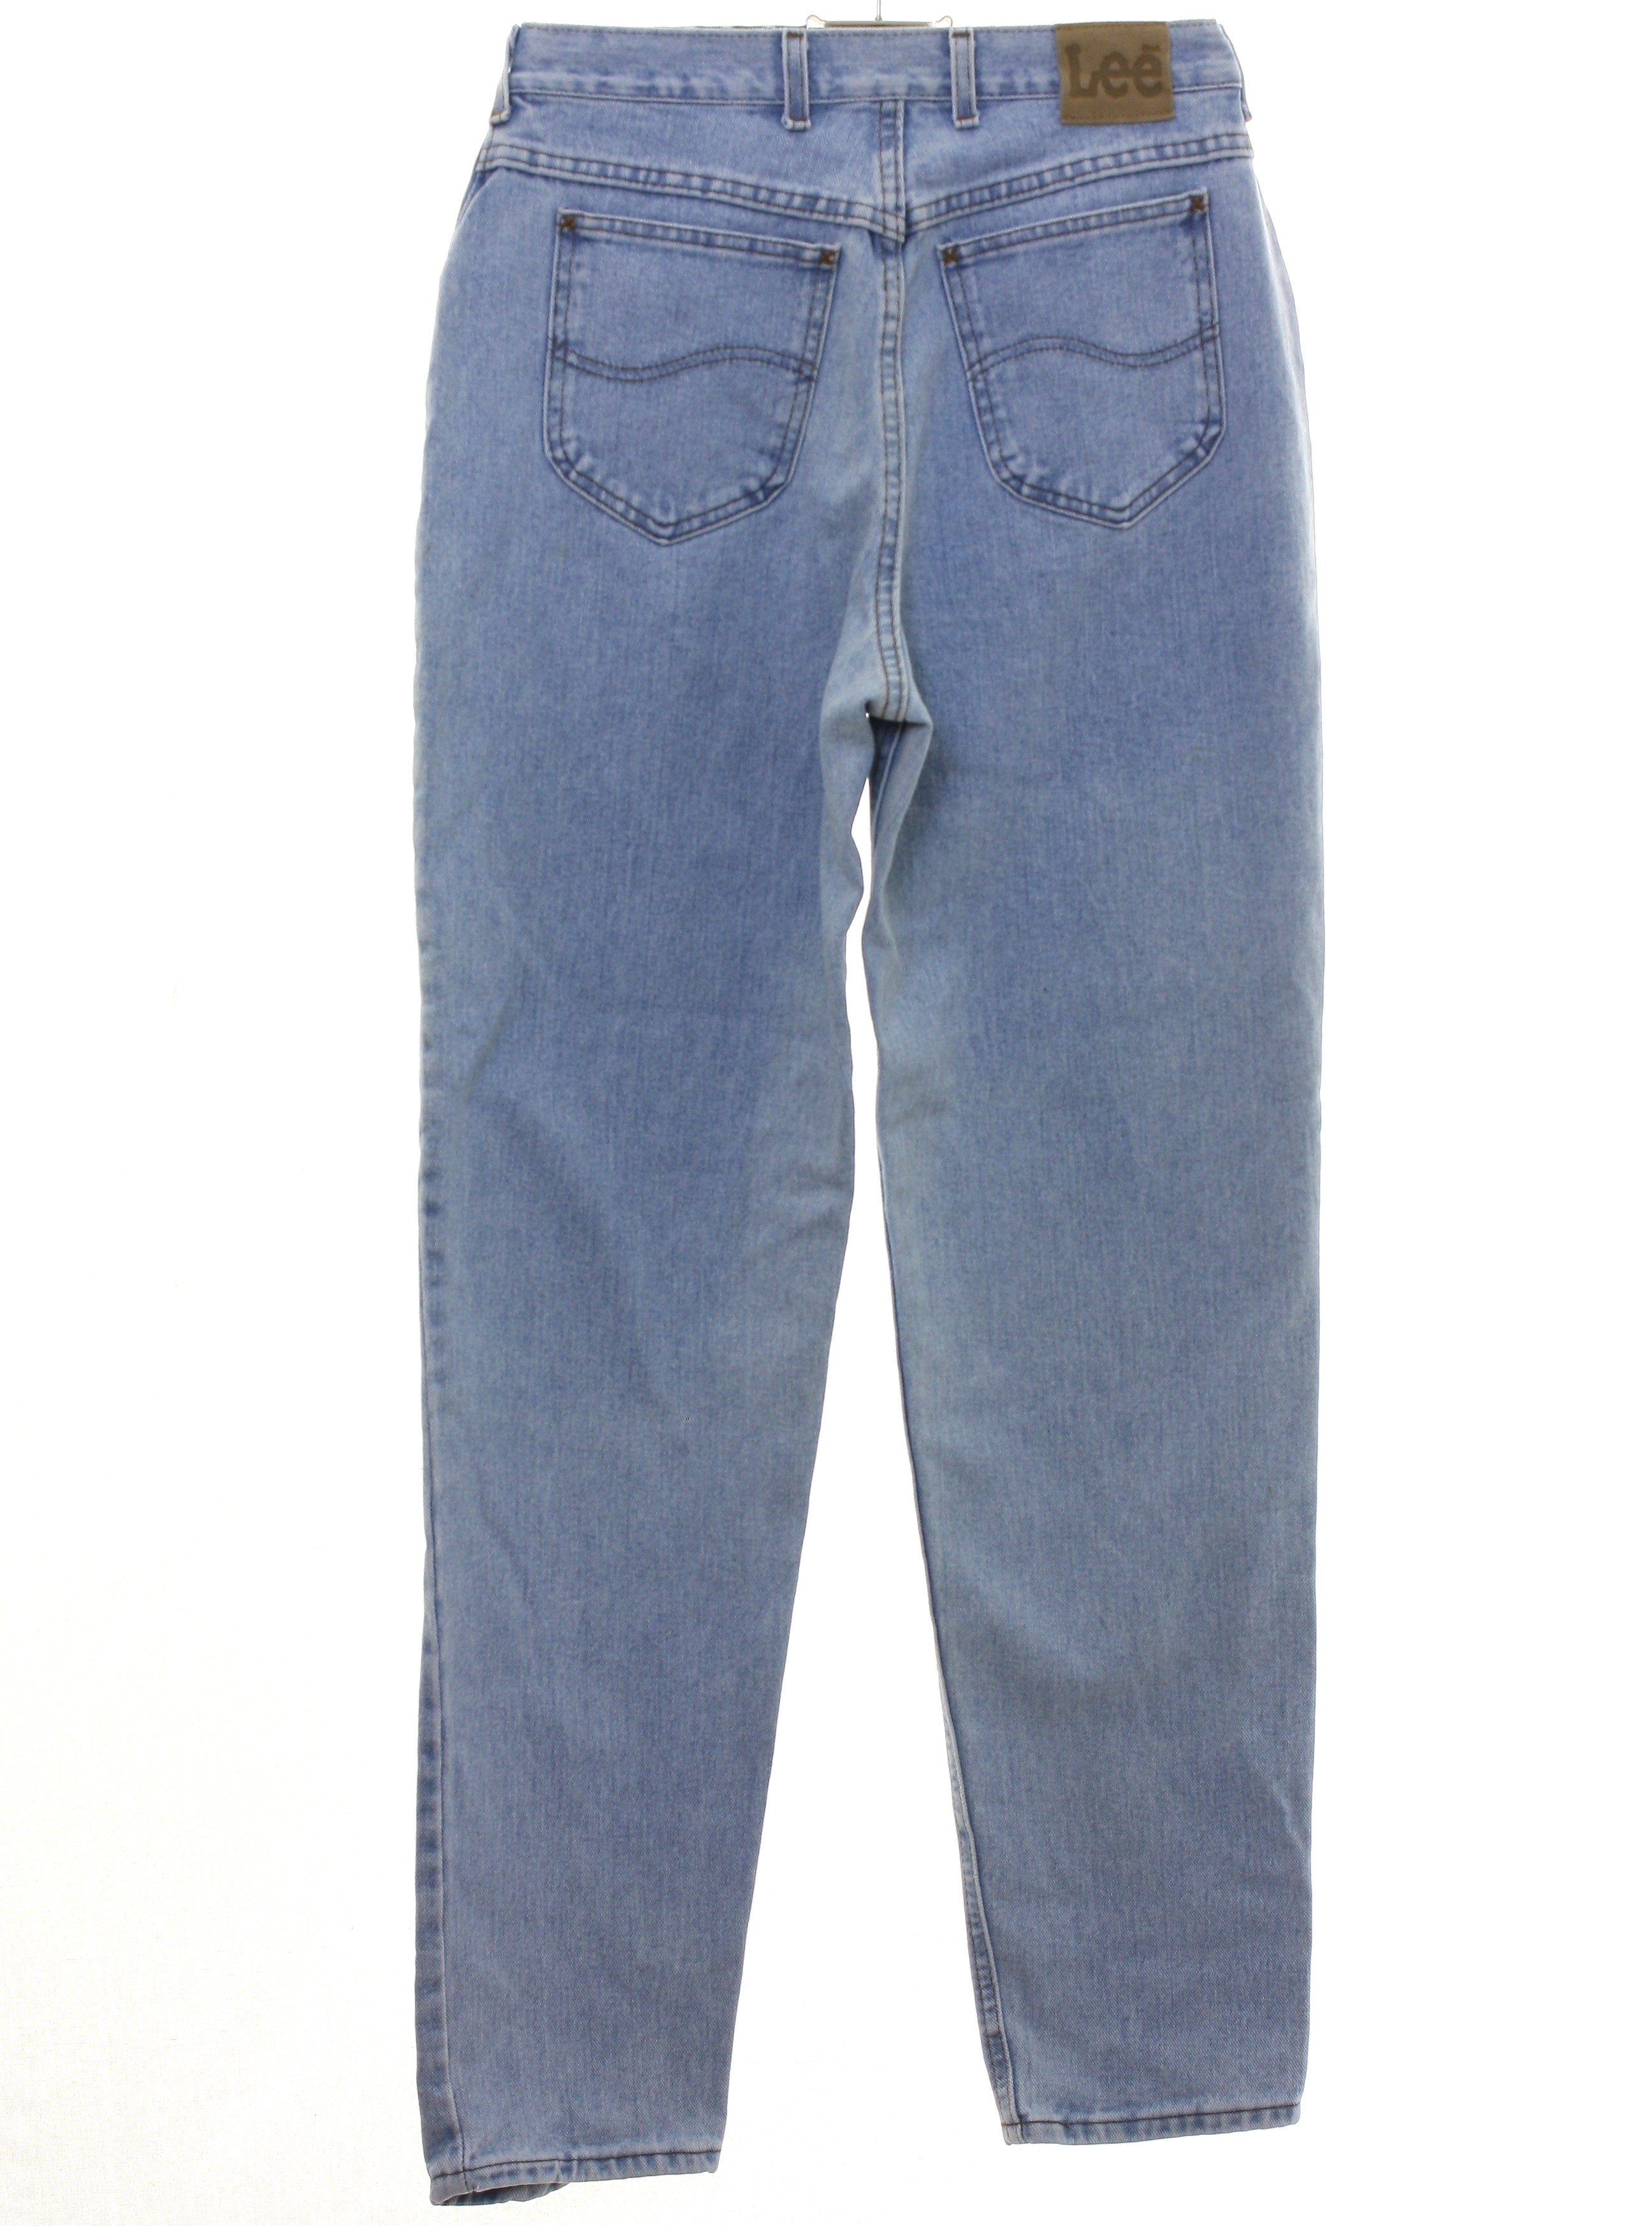 1990s Vintage Pants: 90s -Lee- Womens worn and yellowed light blue wash ...